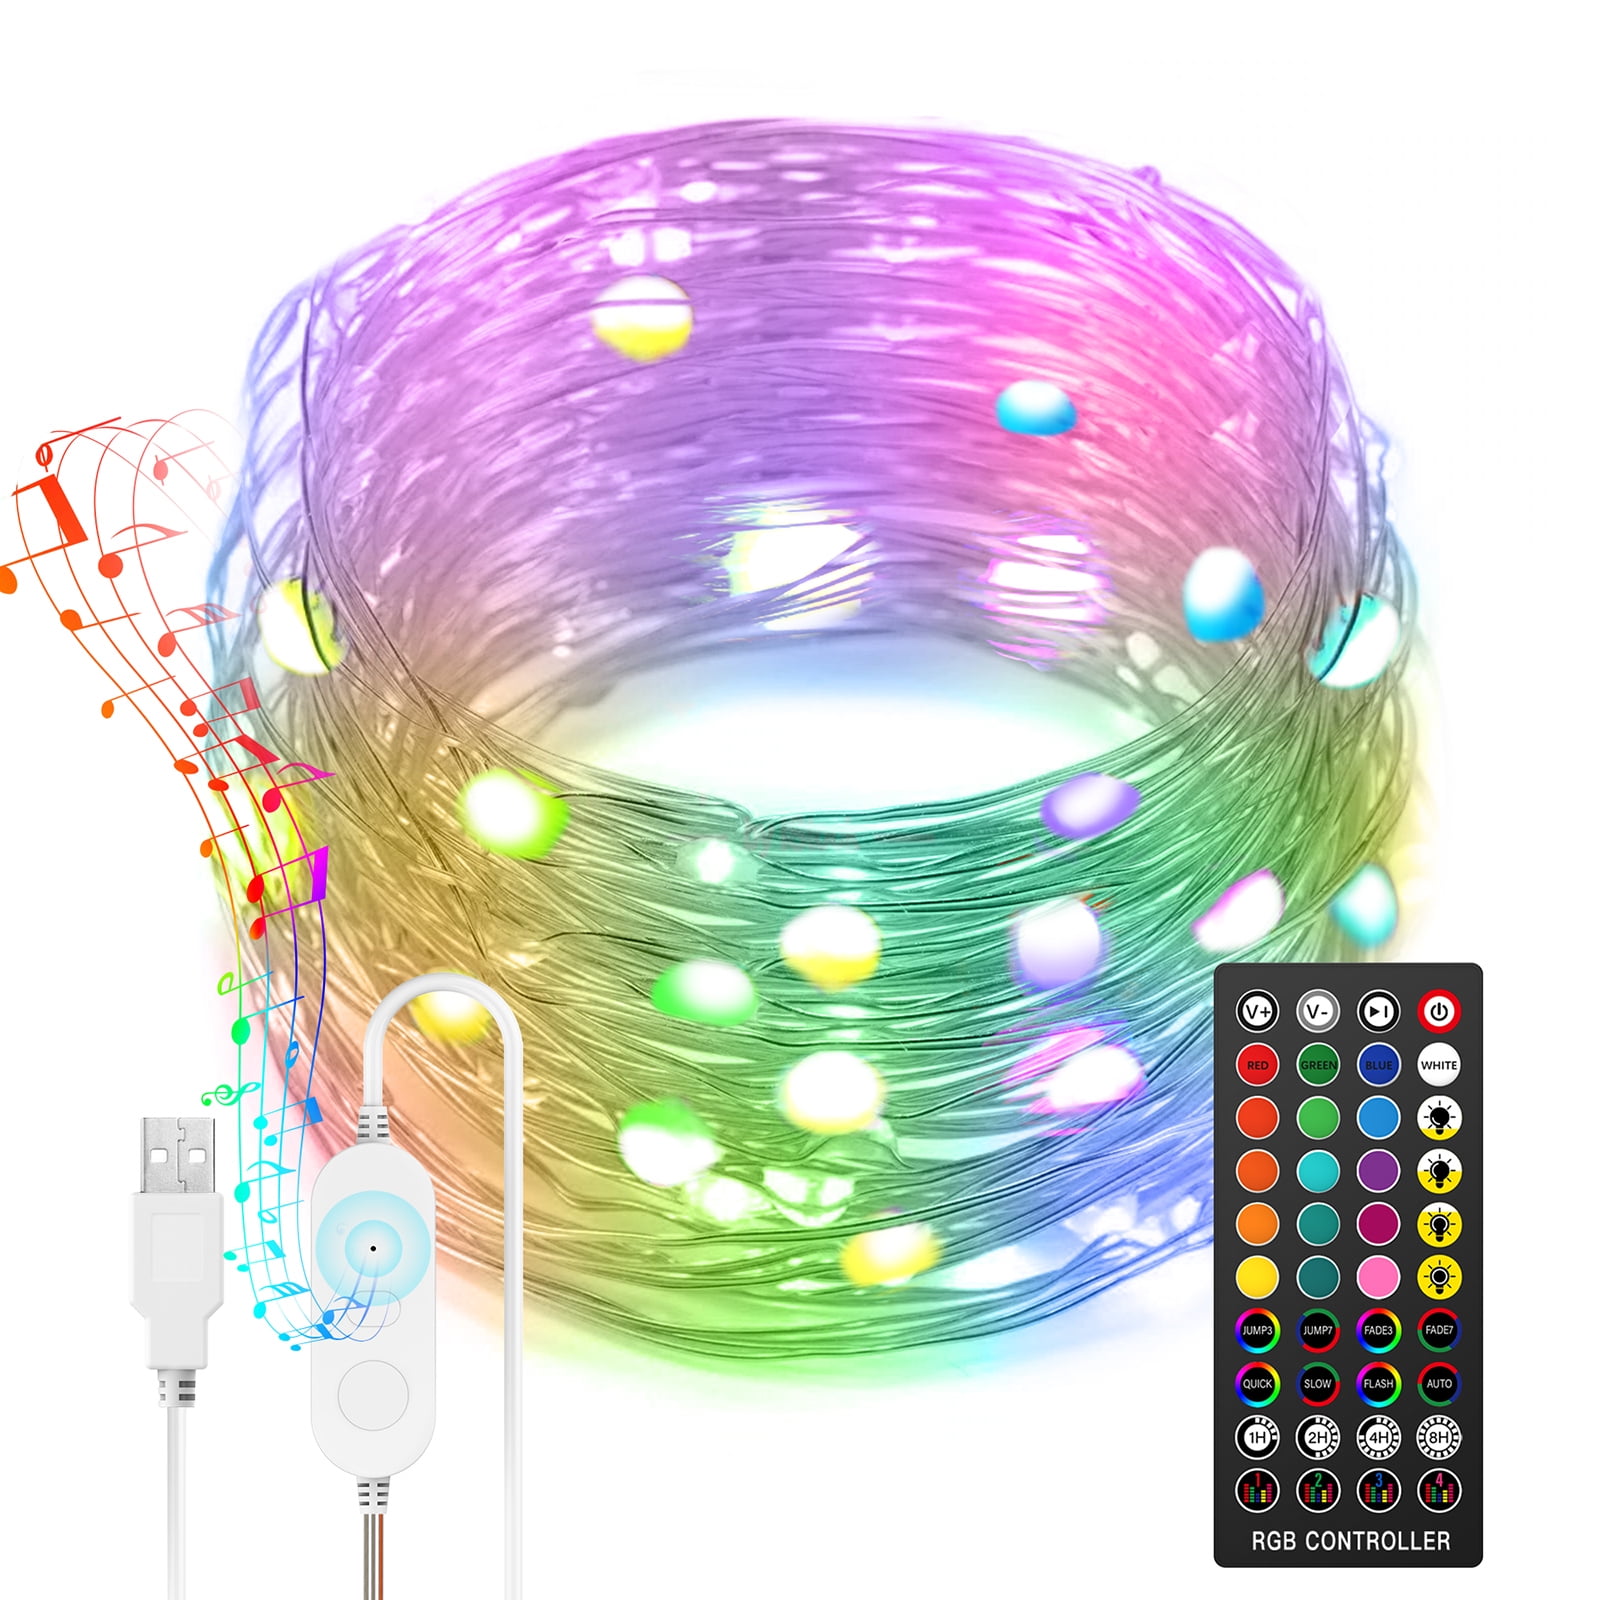 16 Colors 5/10M LED String Light Strip Waterproof Dimmable Fairy Lighting Remote 